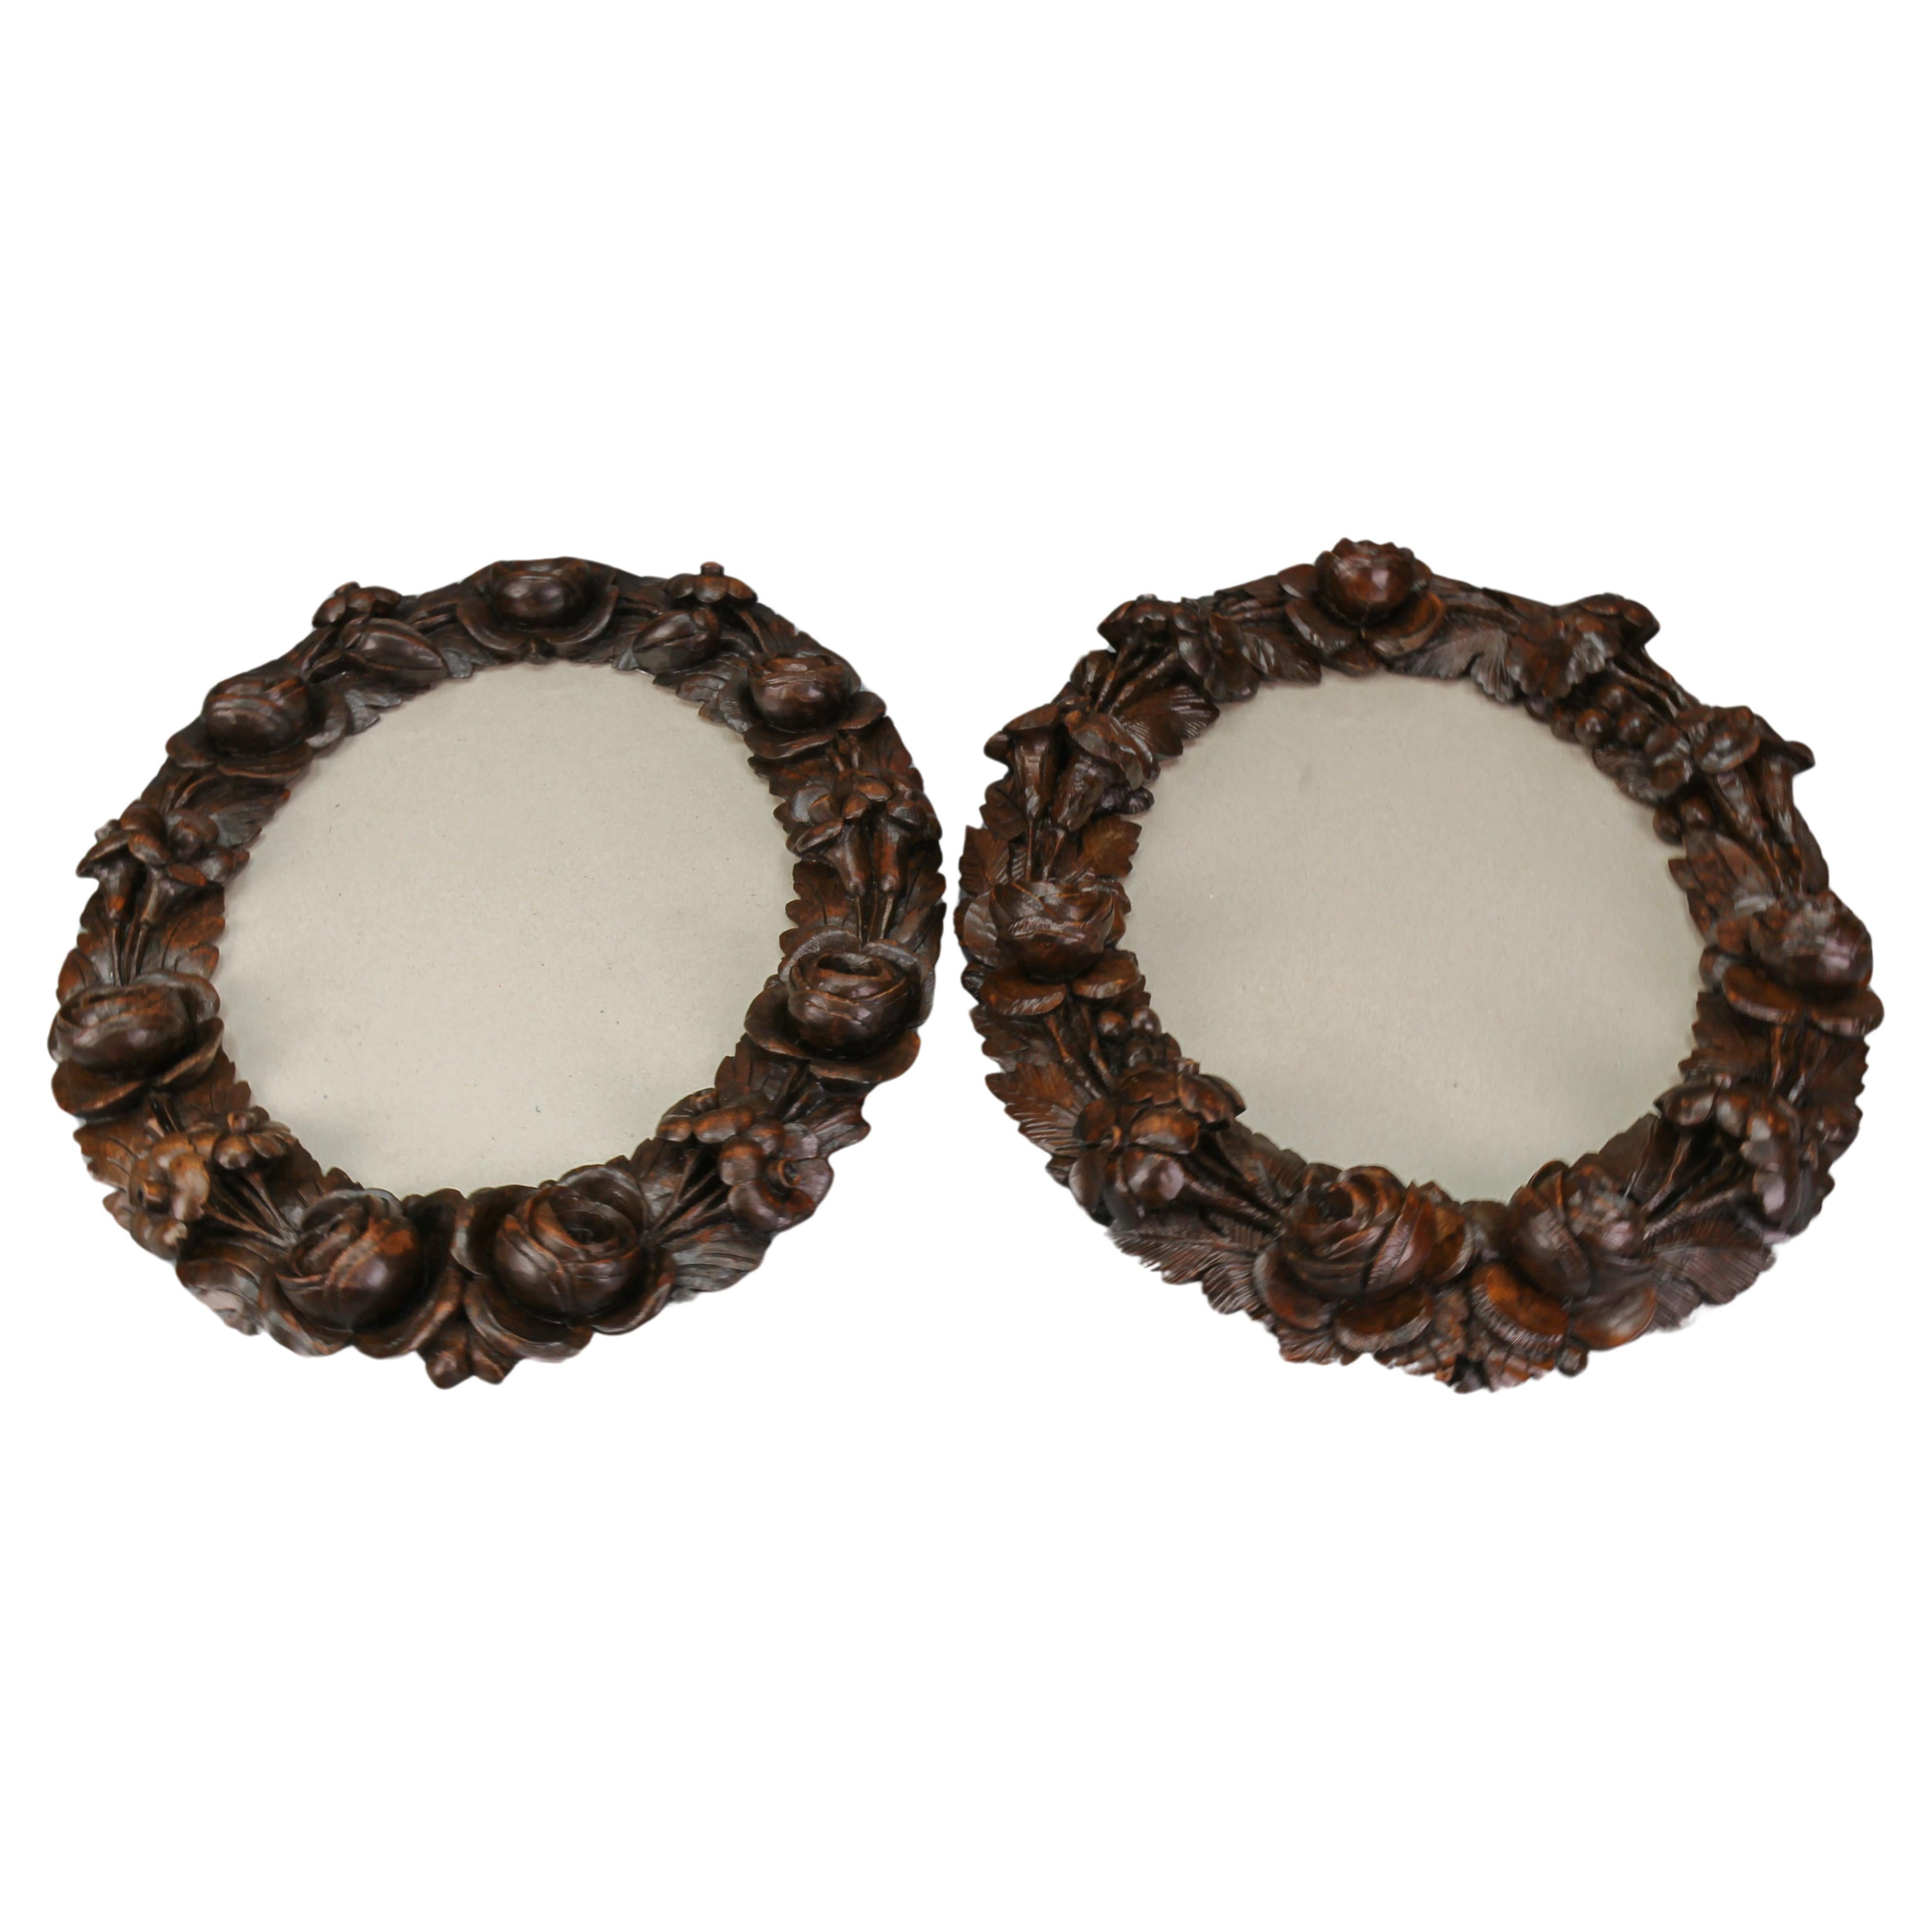 Pair of Carved Walnut Oval Dark Brown Wall Picture Frames with Flowers, ca. 1920